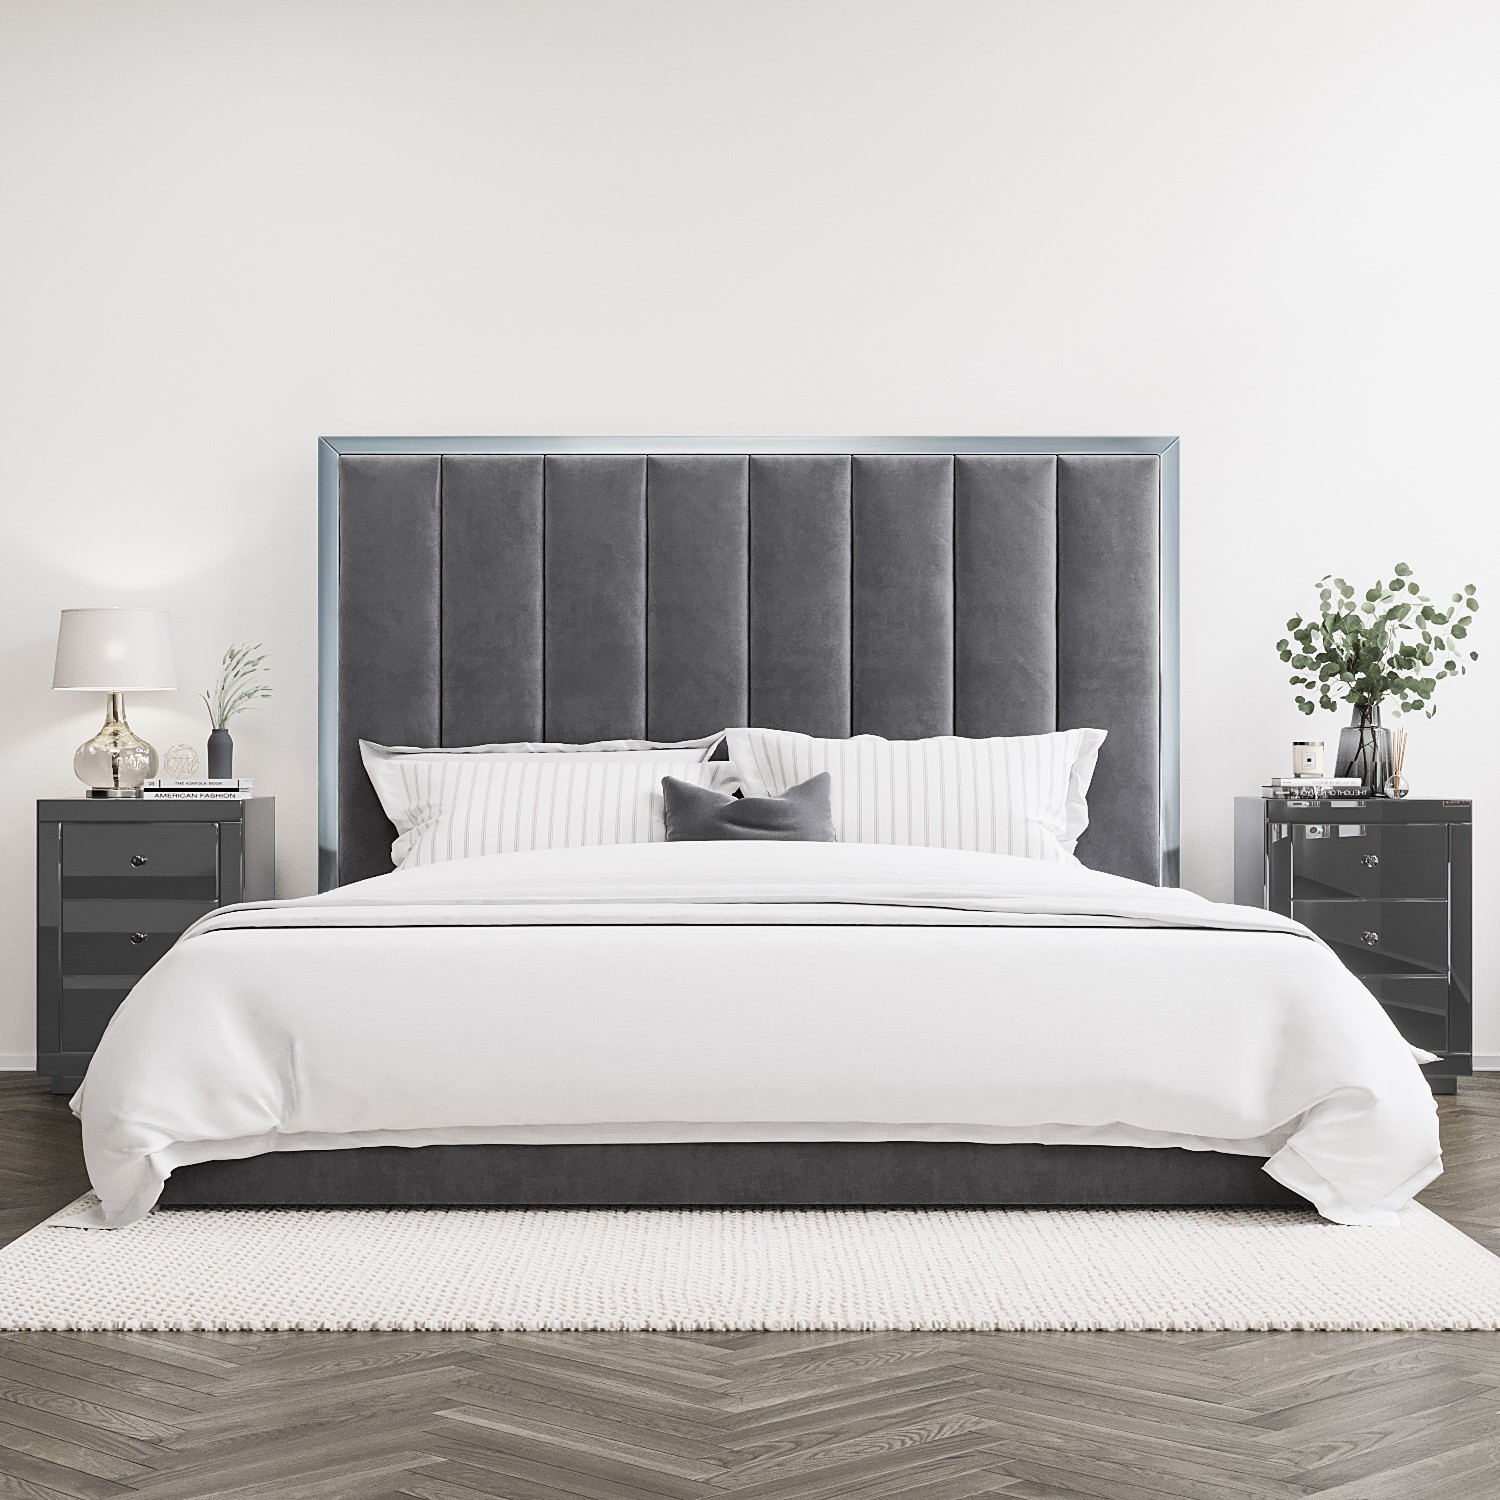 Photo of Grey velvet super king size ottoman bed with high headboard - aaliyah